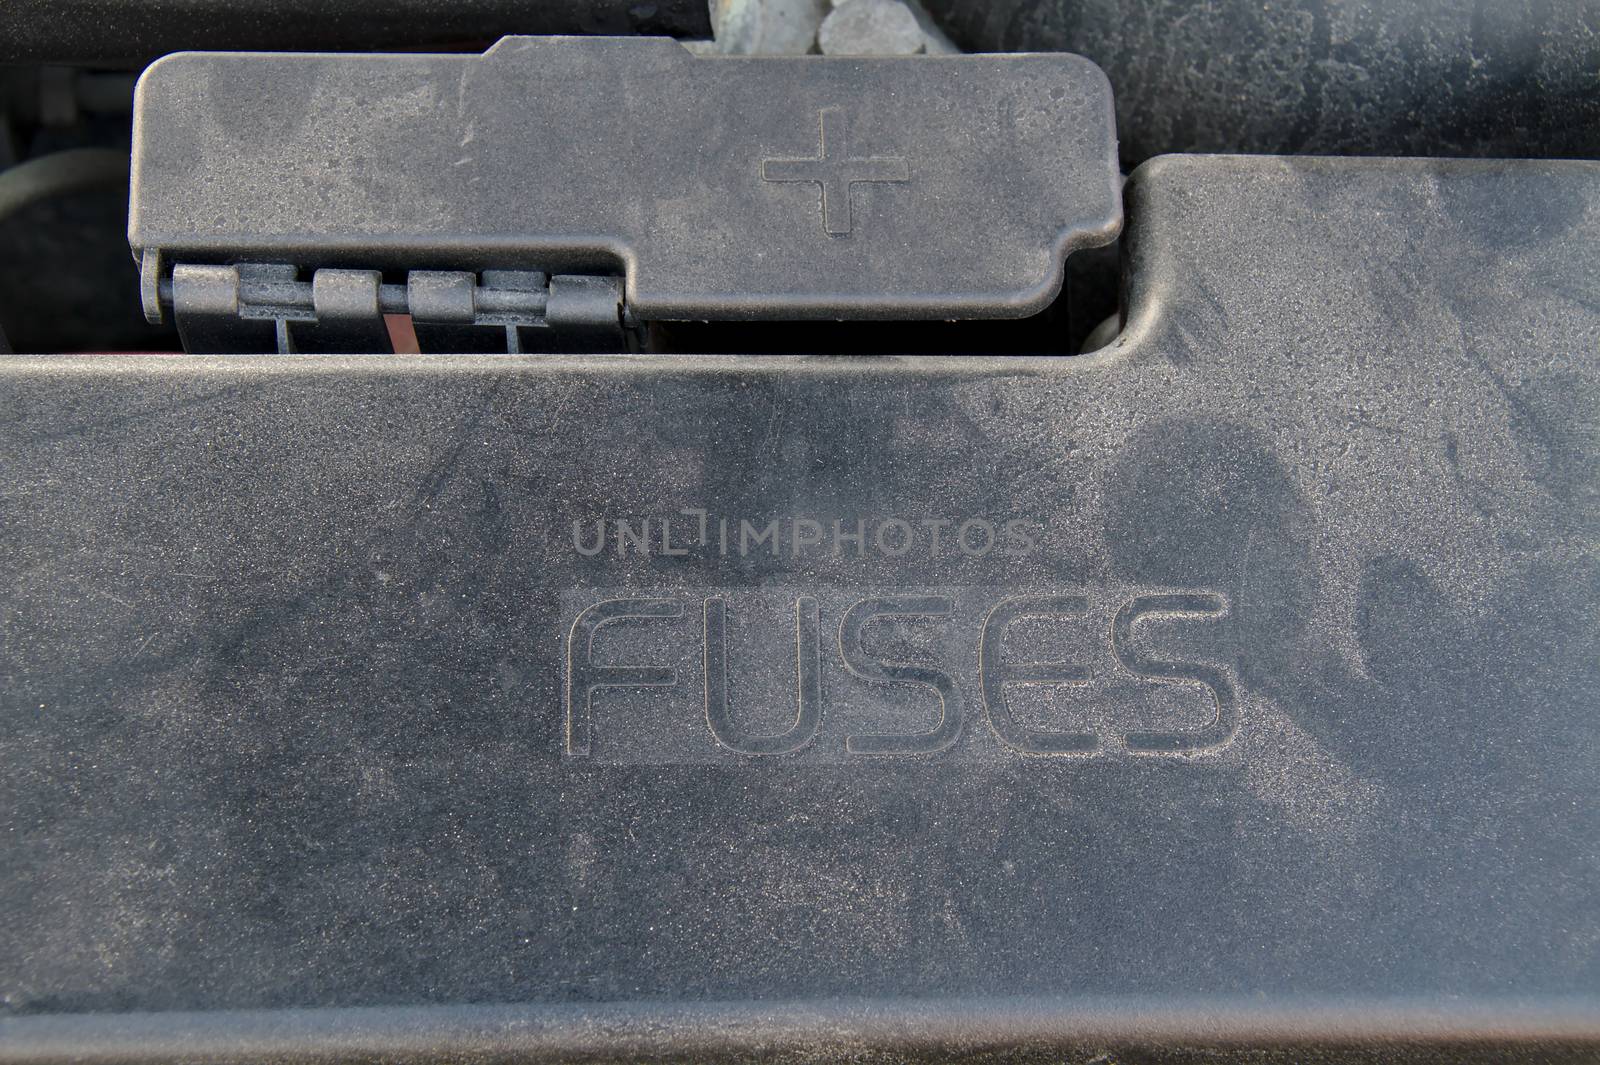 Cover of a under hood fuse box of a car. External plus terminal for jumper cables next to the fusebox.